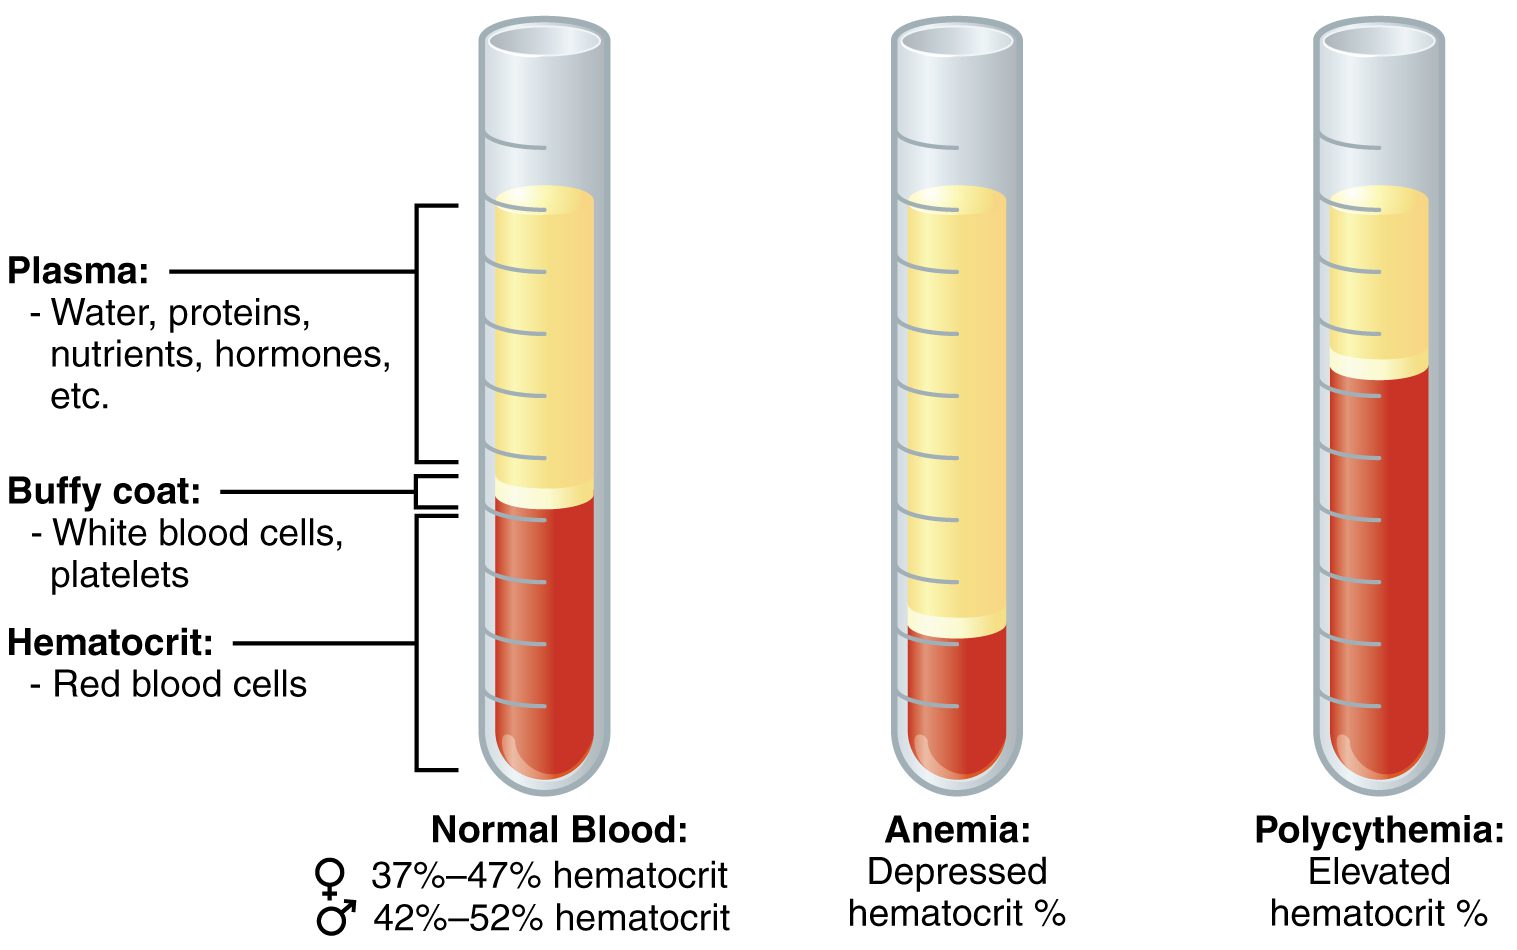 Blood Tests and Lab Analysis